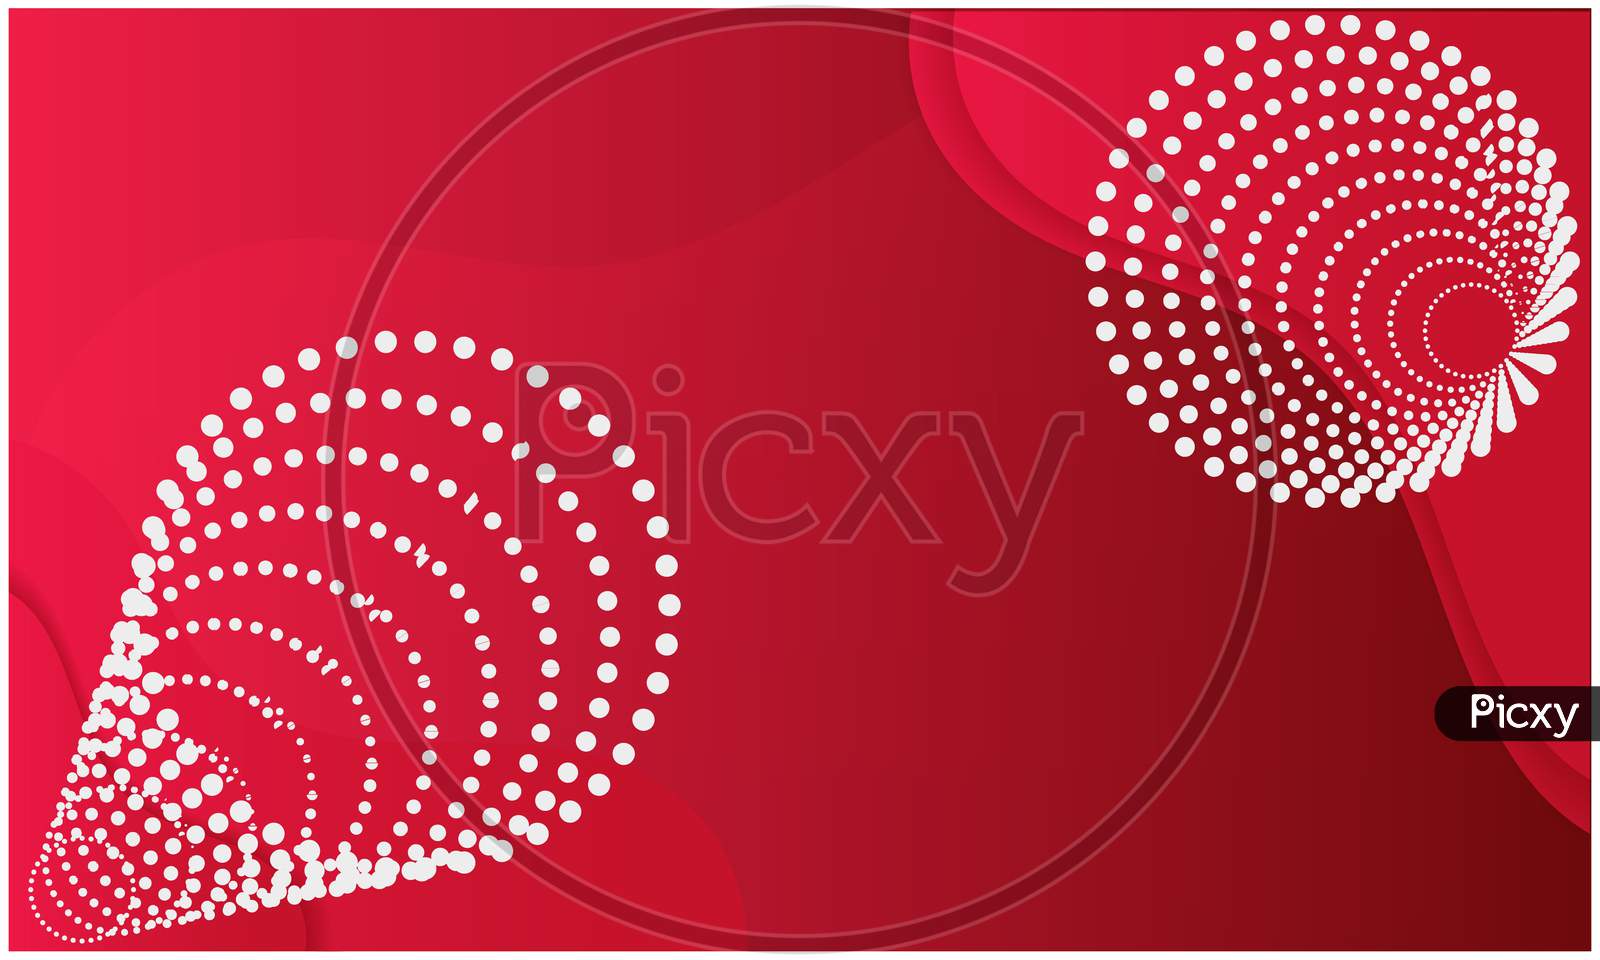 3D Illustration Of Circles On Abstract Red Background